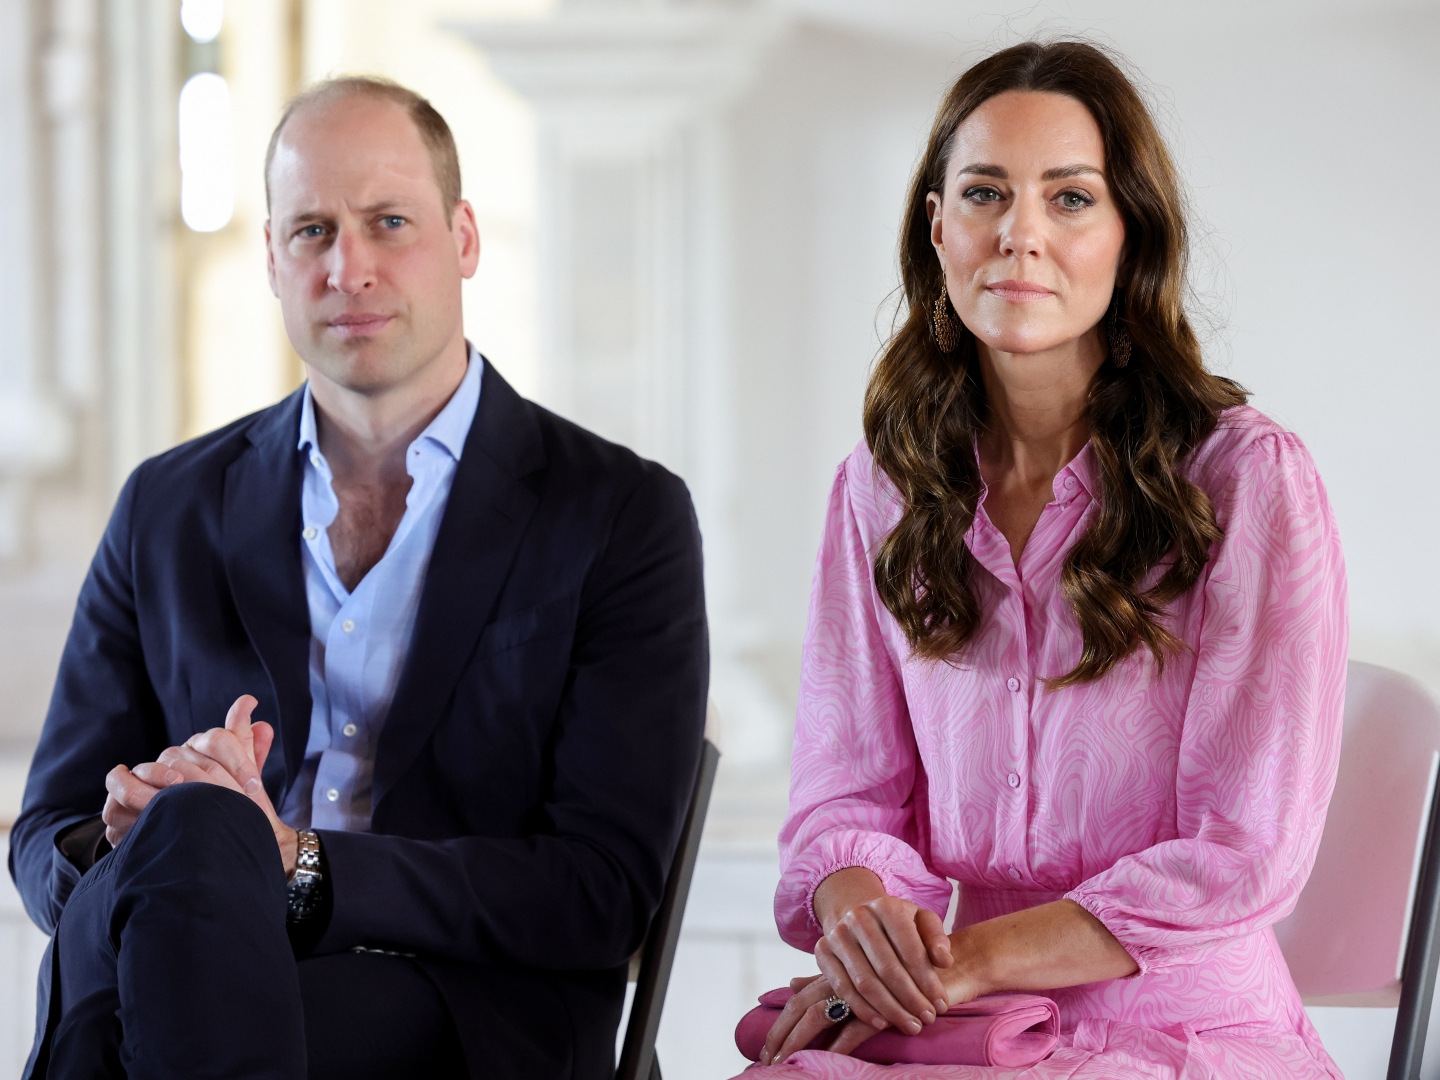 Prince William, Duke of Cambridge and Catherine, Duchess of Cambridge during a visit to Daystar Evangelical Church on March 26, 2022 in Great Abaco, Bahamas